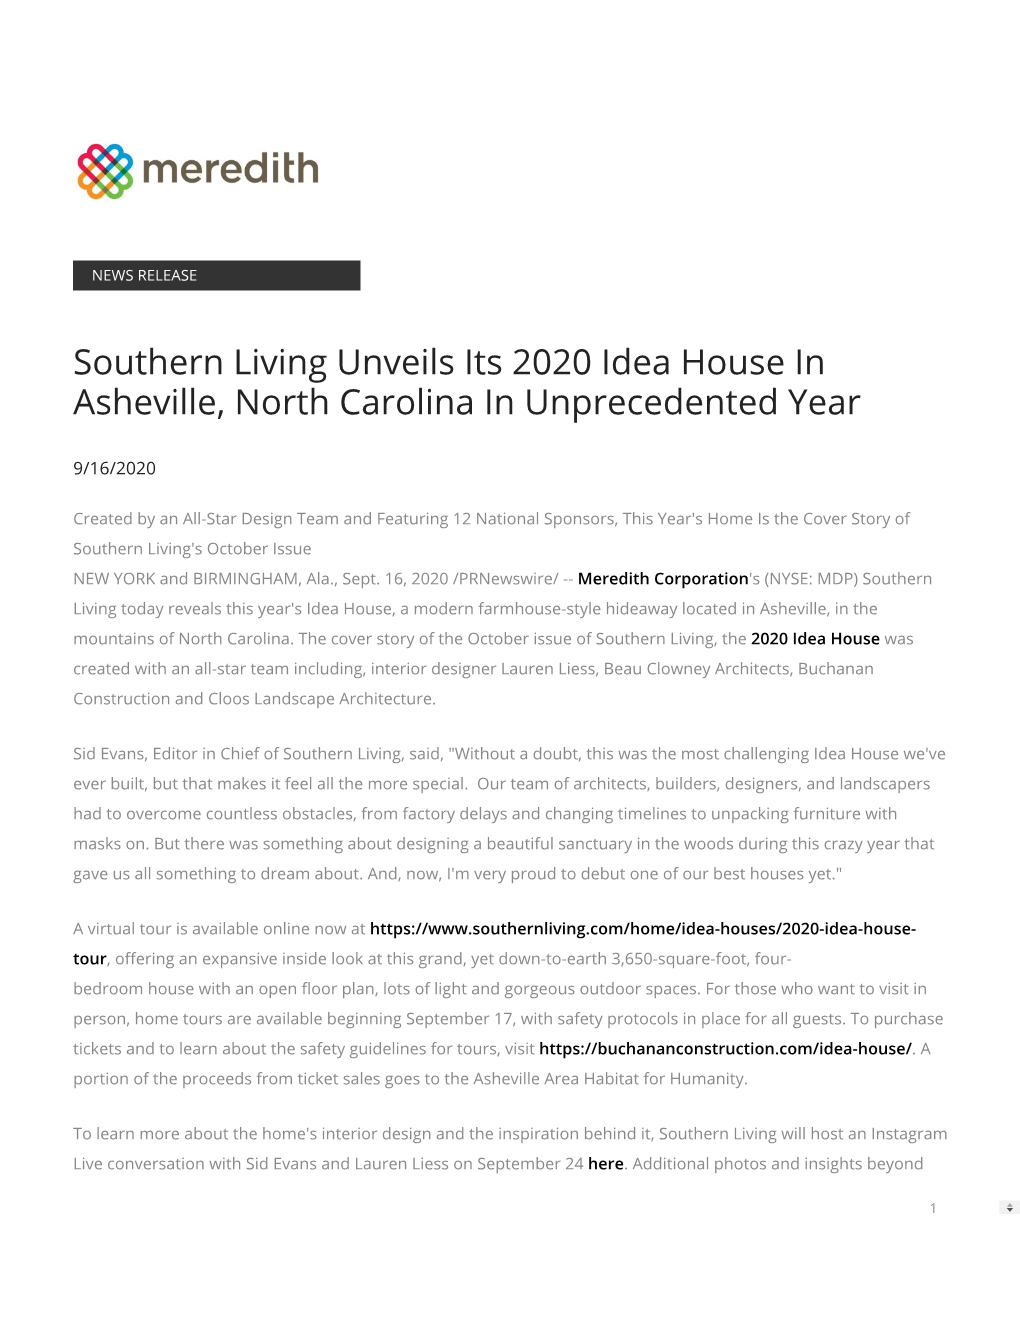 Southern Living Unveils Its 2020 Idea House in Asheville, North Carolina in Unprecedented Year